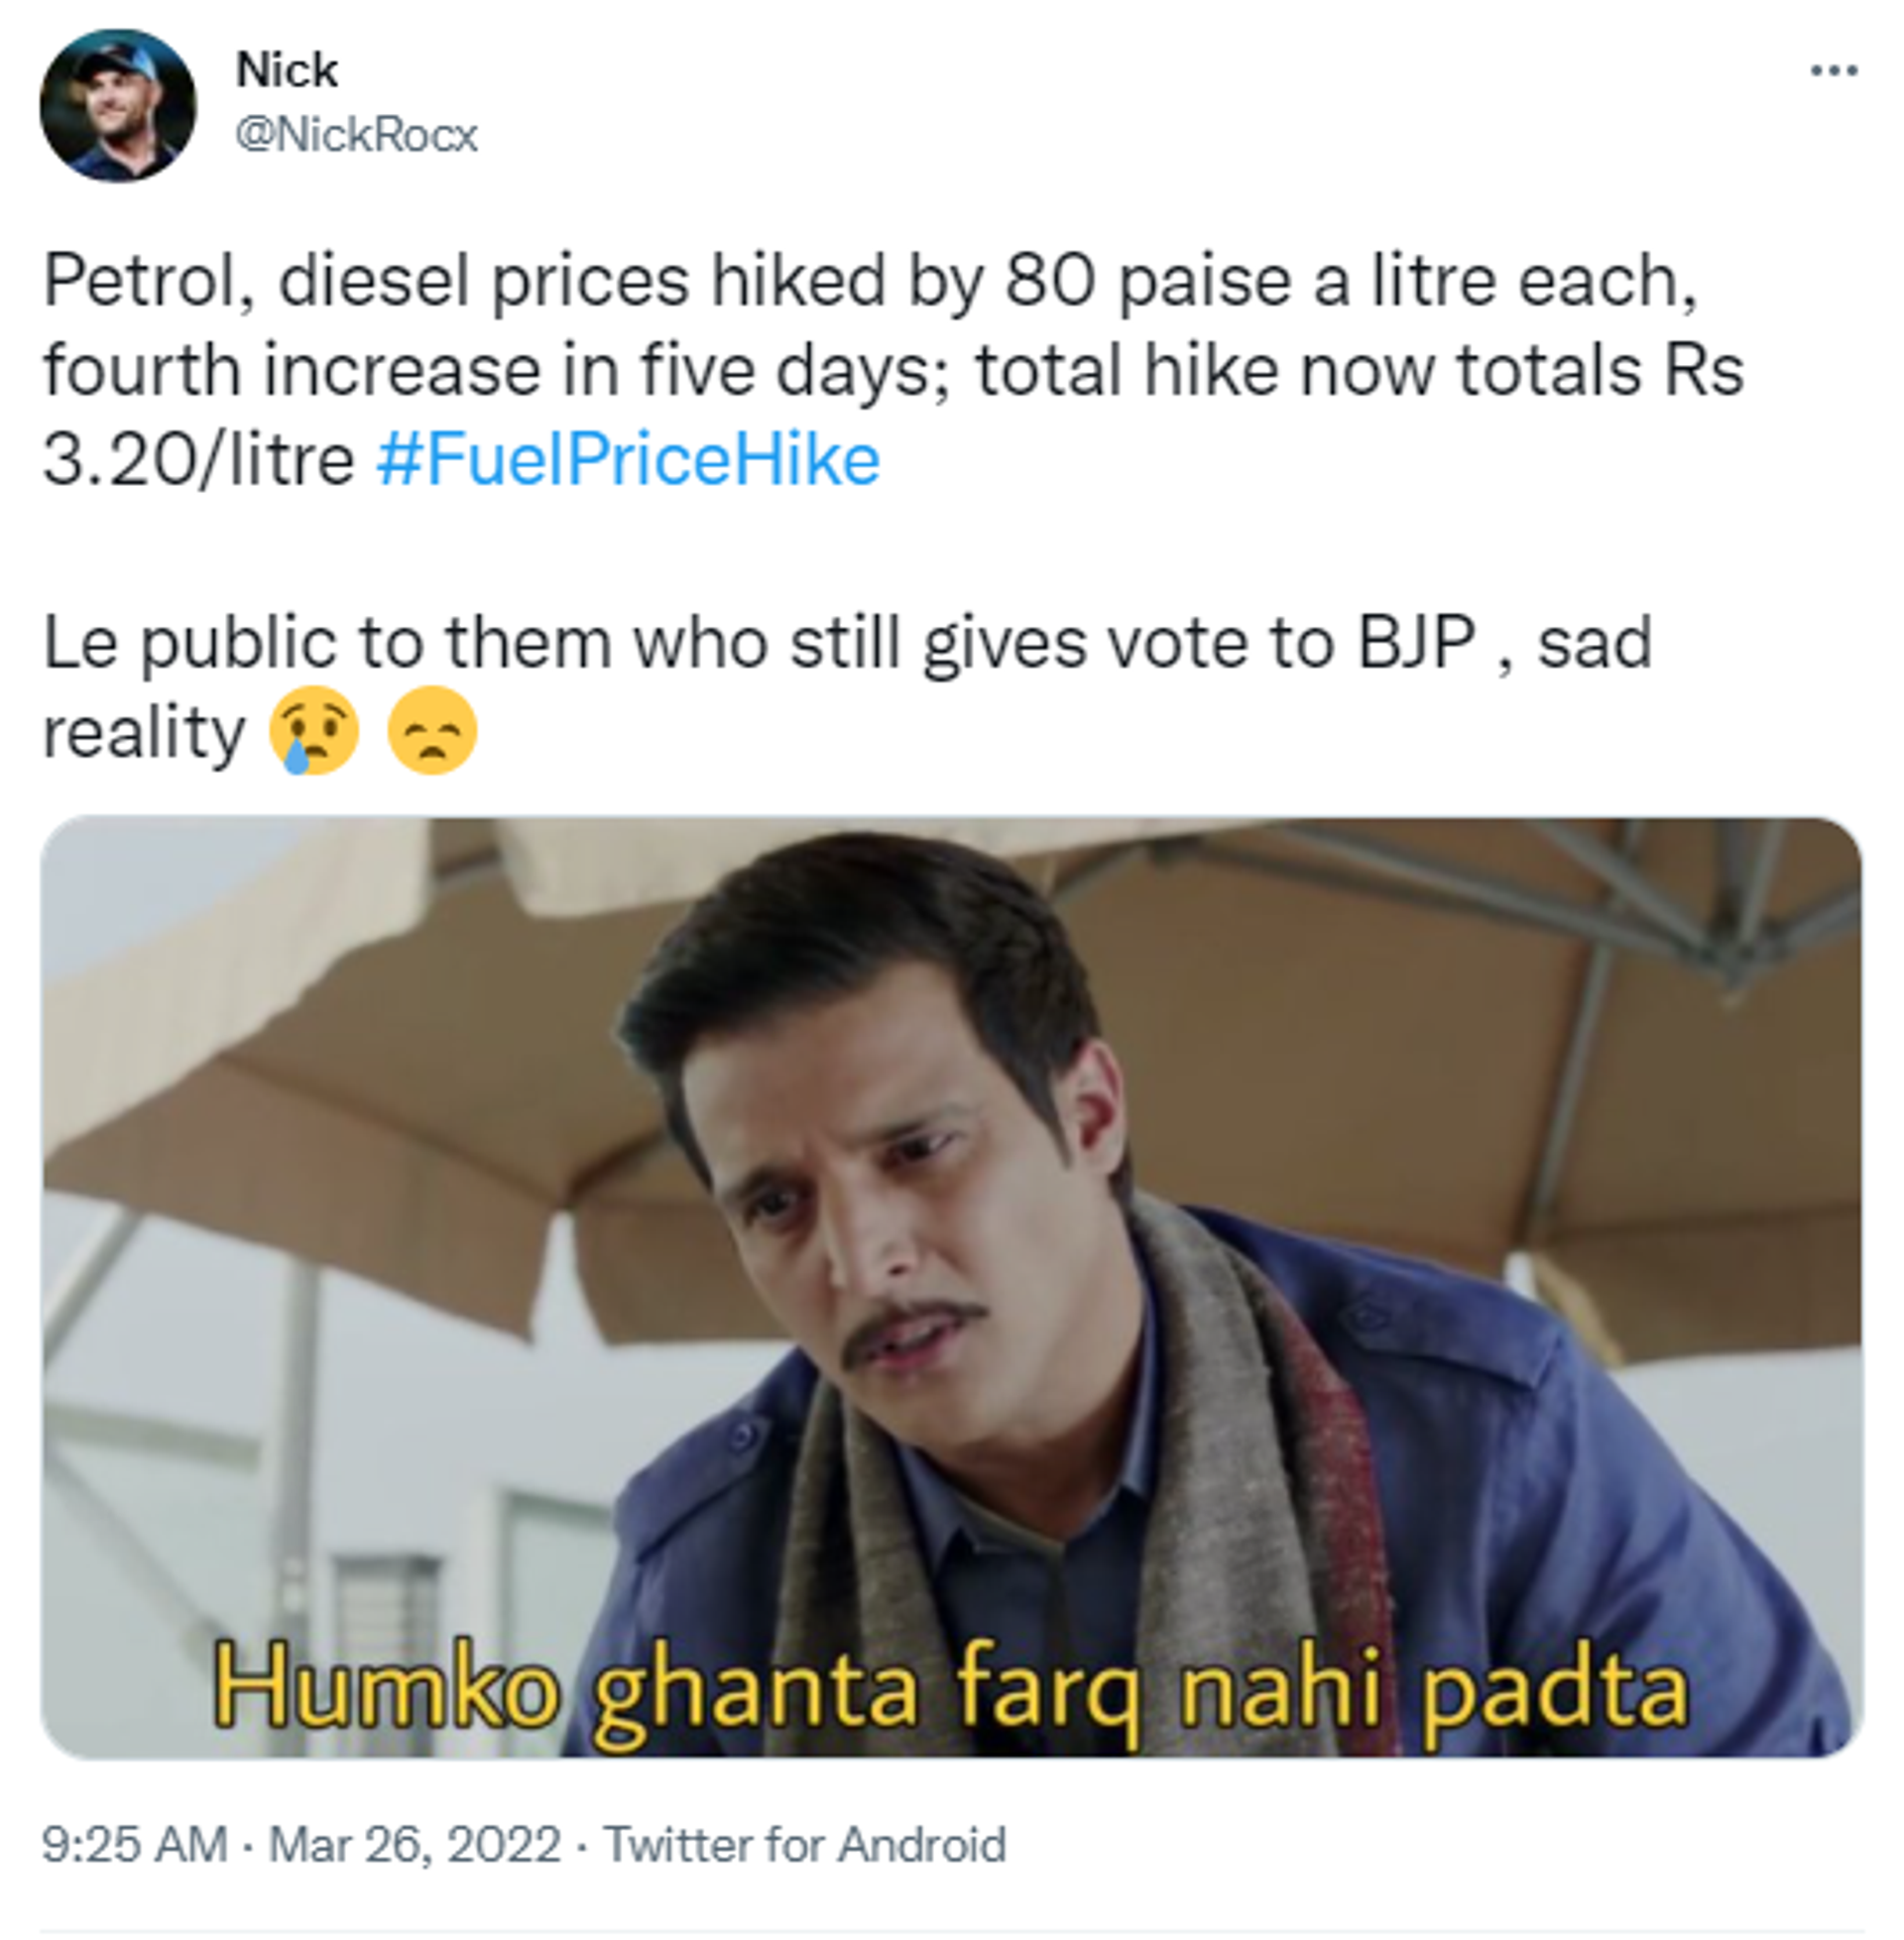 A Twitter user takes a jab at BJP supporters over increase in fuel prices. - Sputnik International, 1920, 26.03.2022